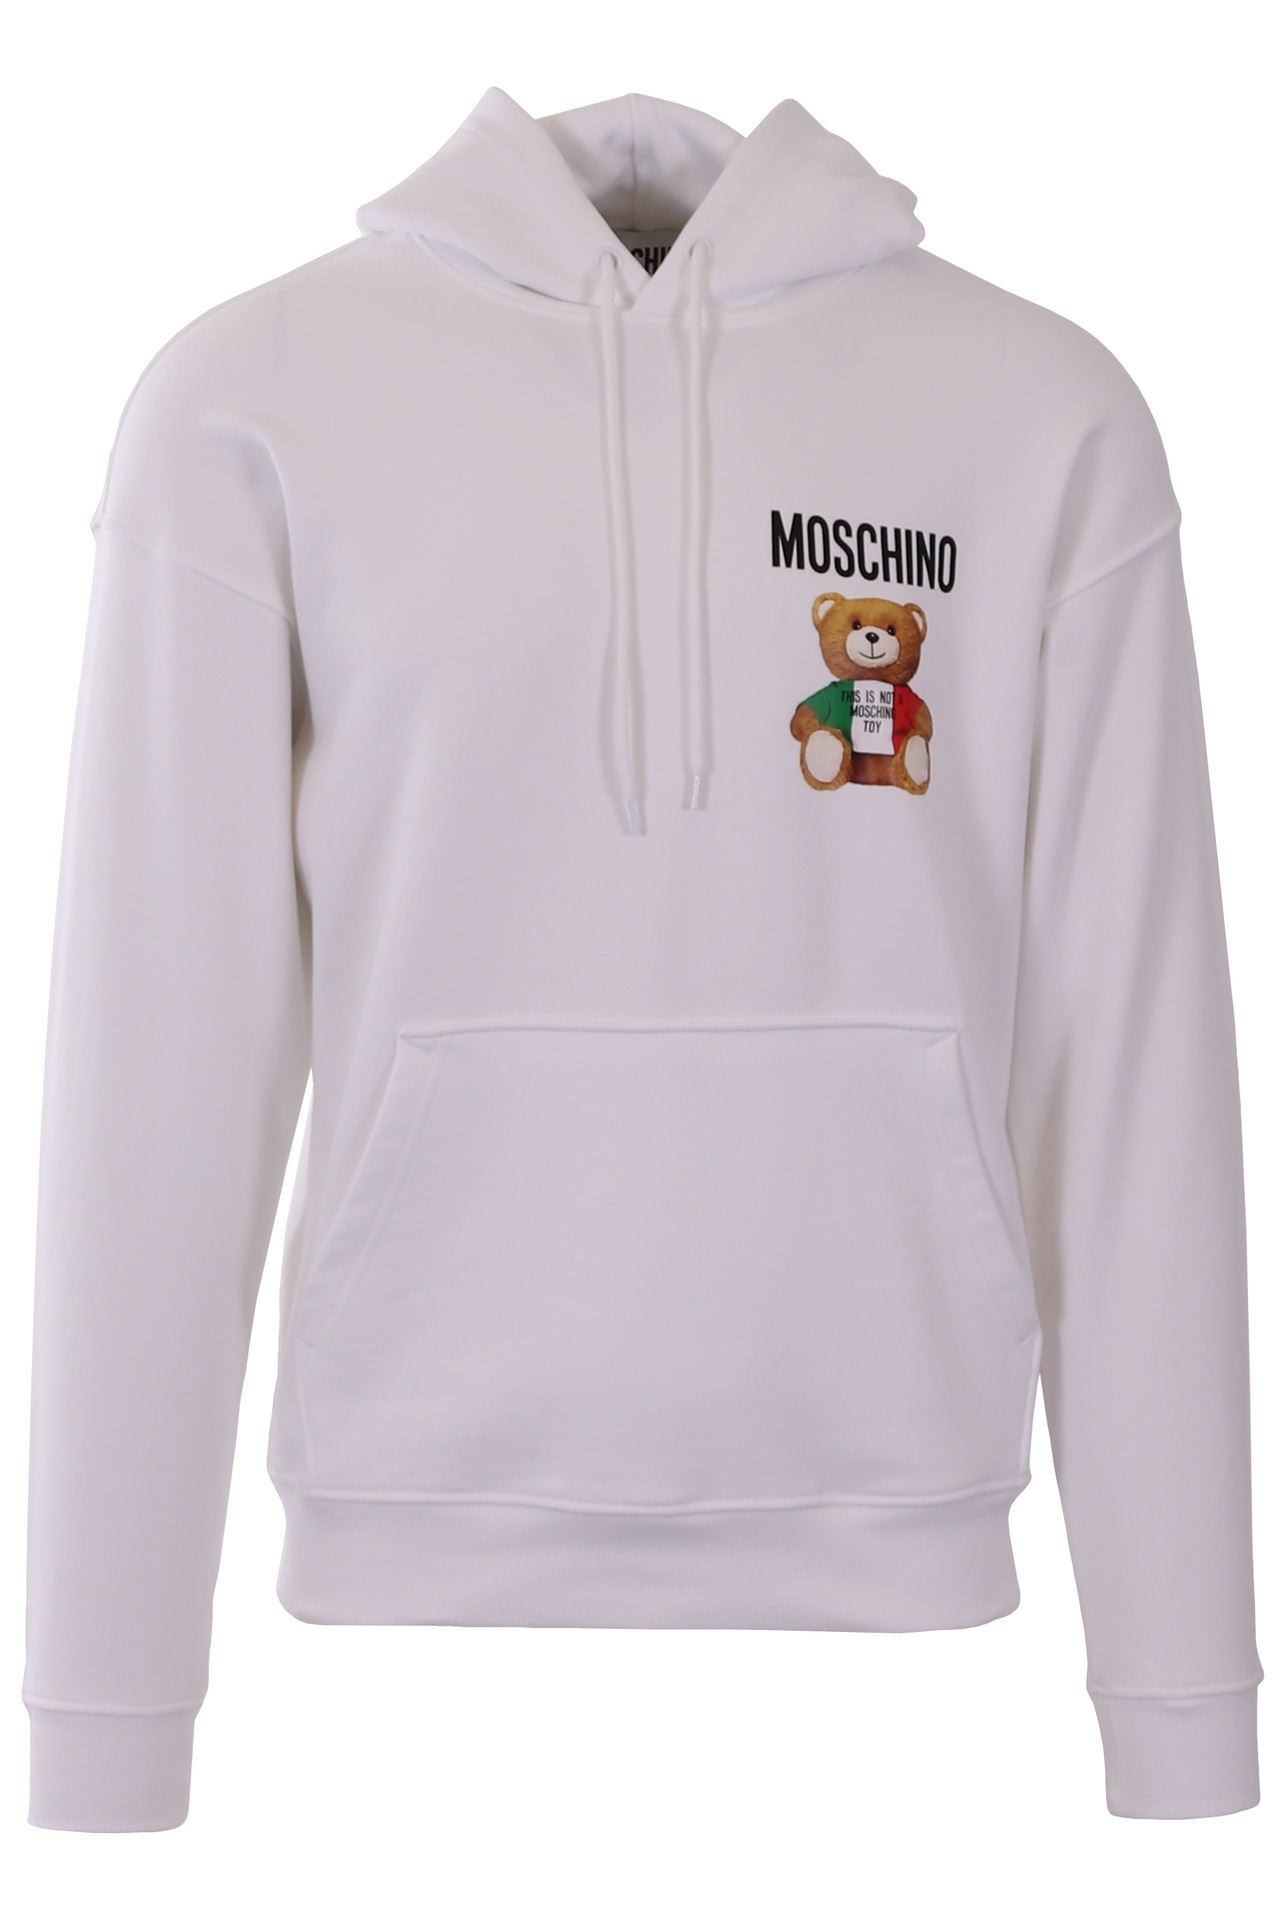 Moschino COUTURE! Printed TEDDY BEAR Hoodie women - Glamood Outlet